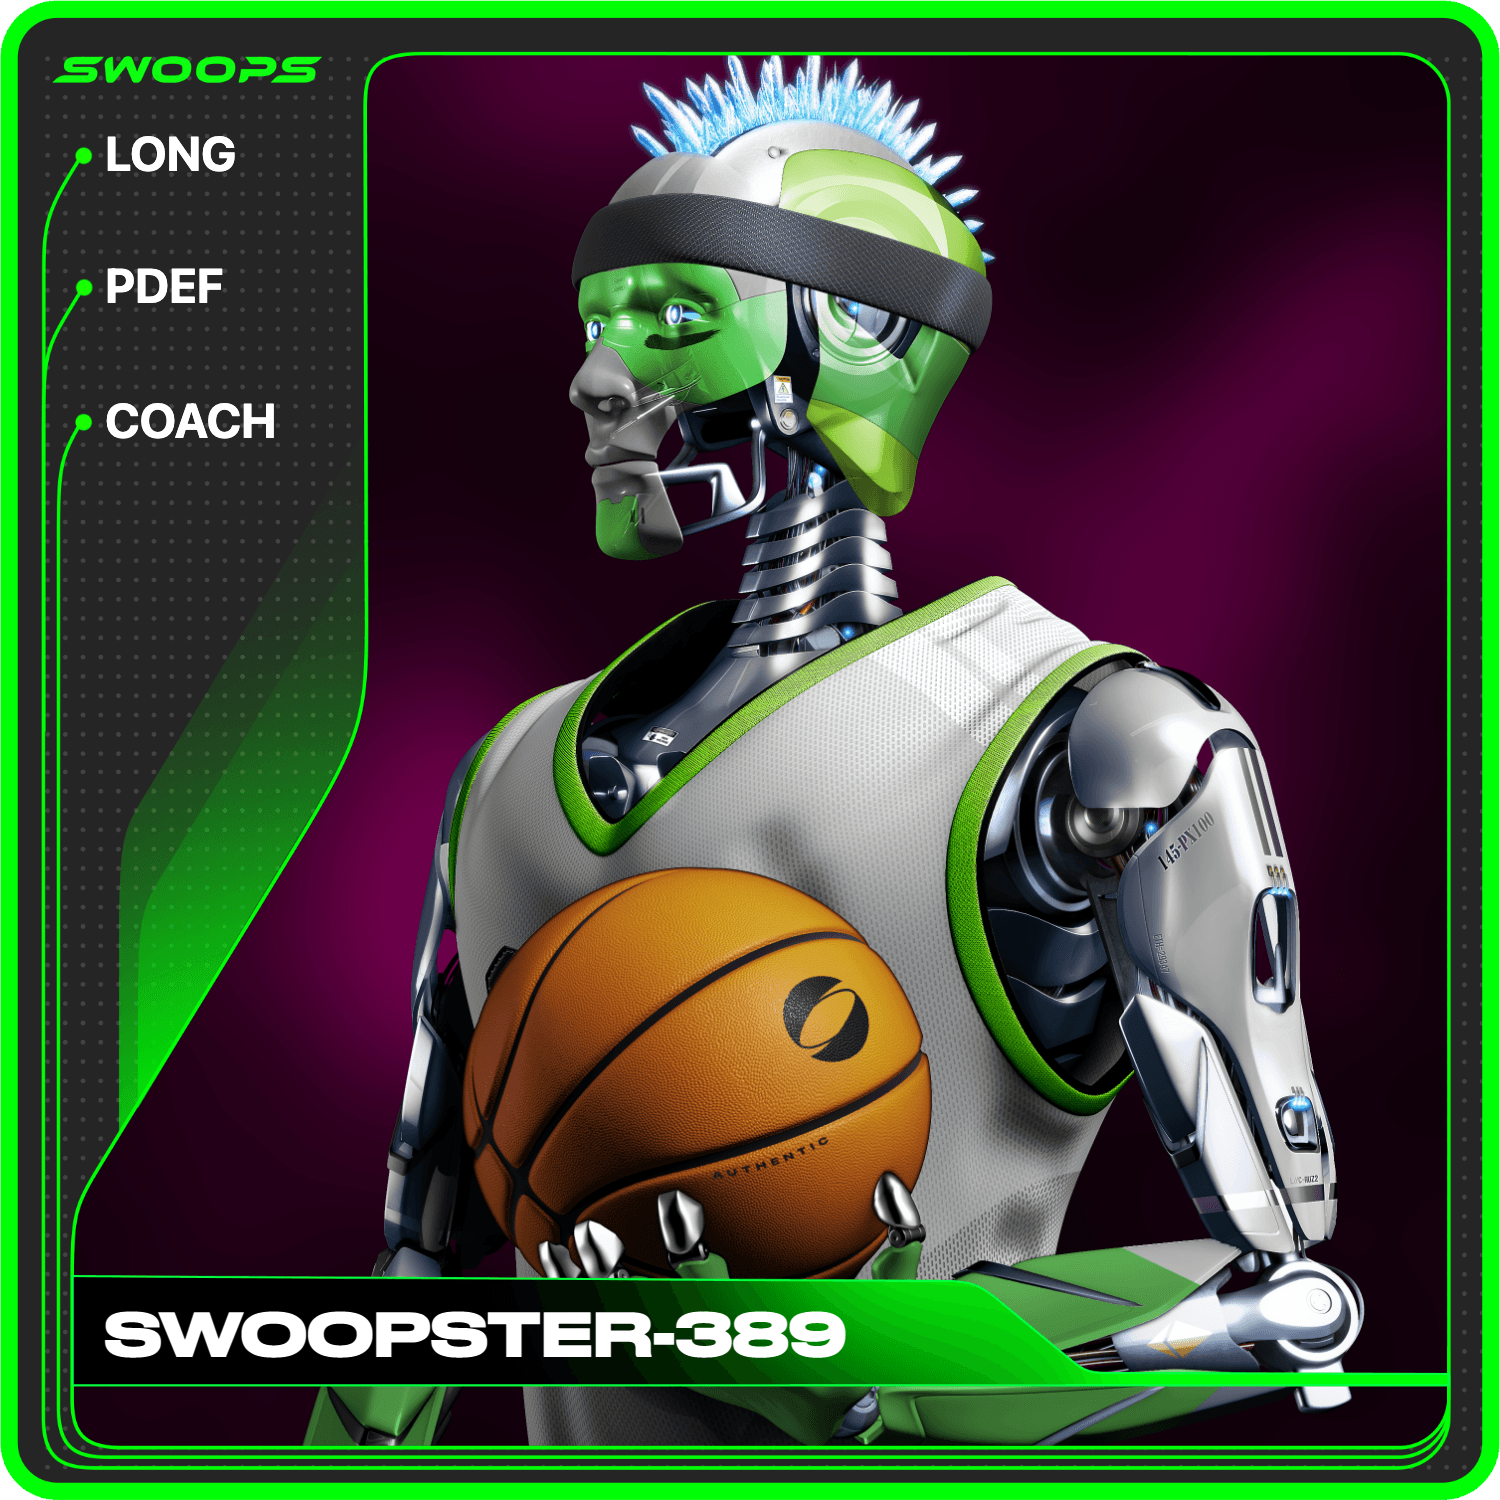 SWOOPSTER-389